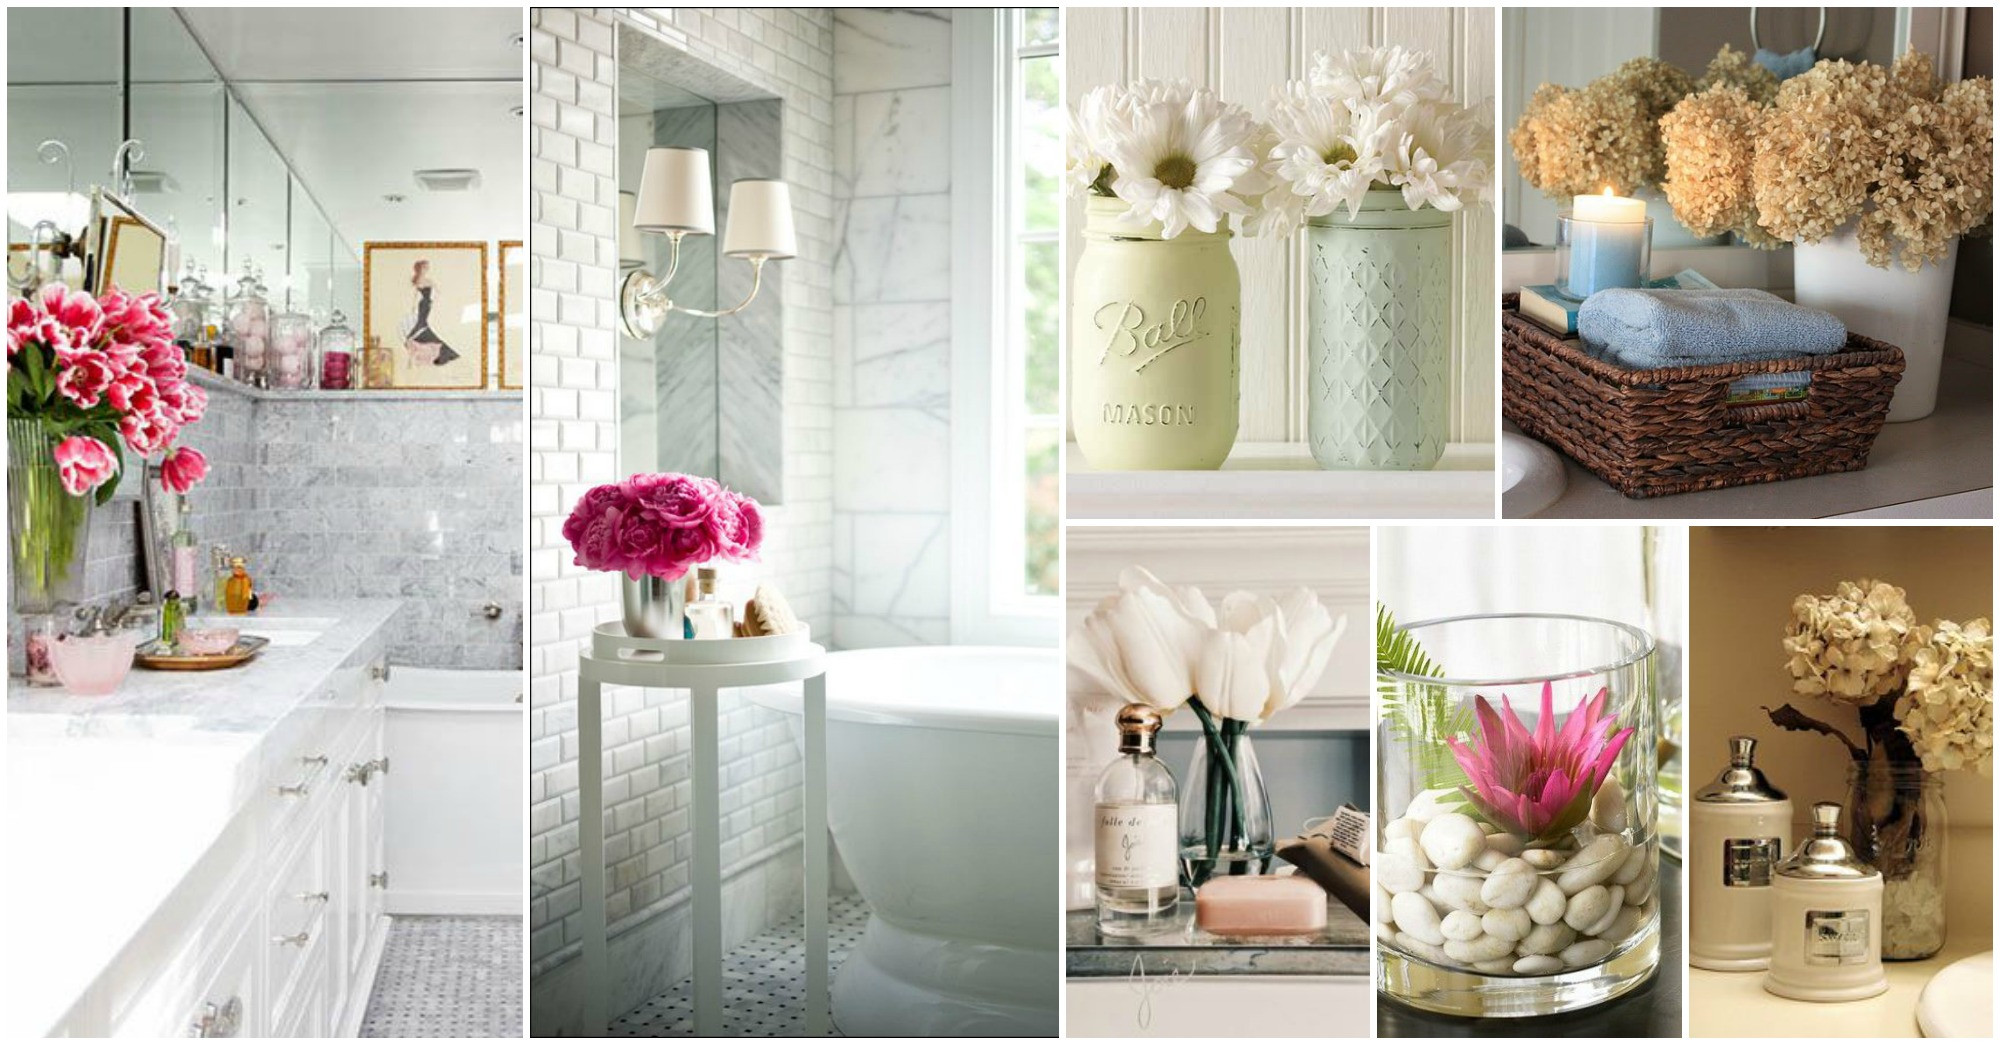 Bathroom Decor Pictures
 Relaxing Flowers Bathroom Decor Ideas That Will Refresh